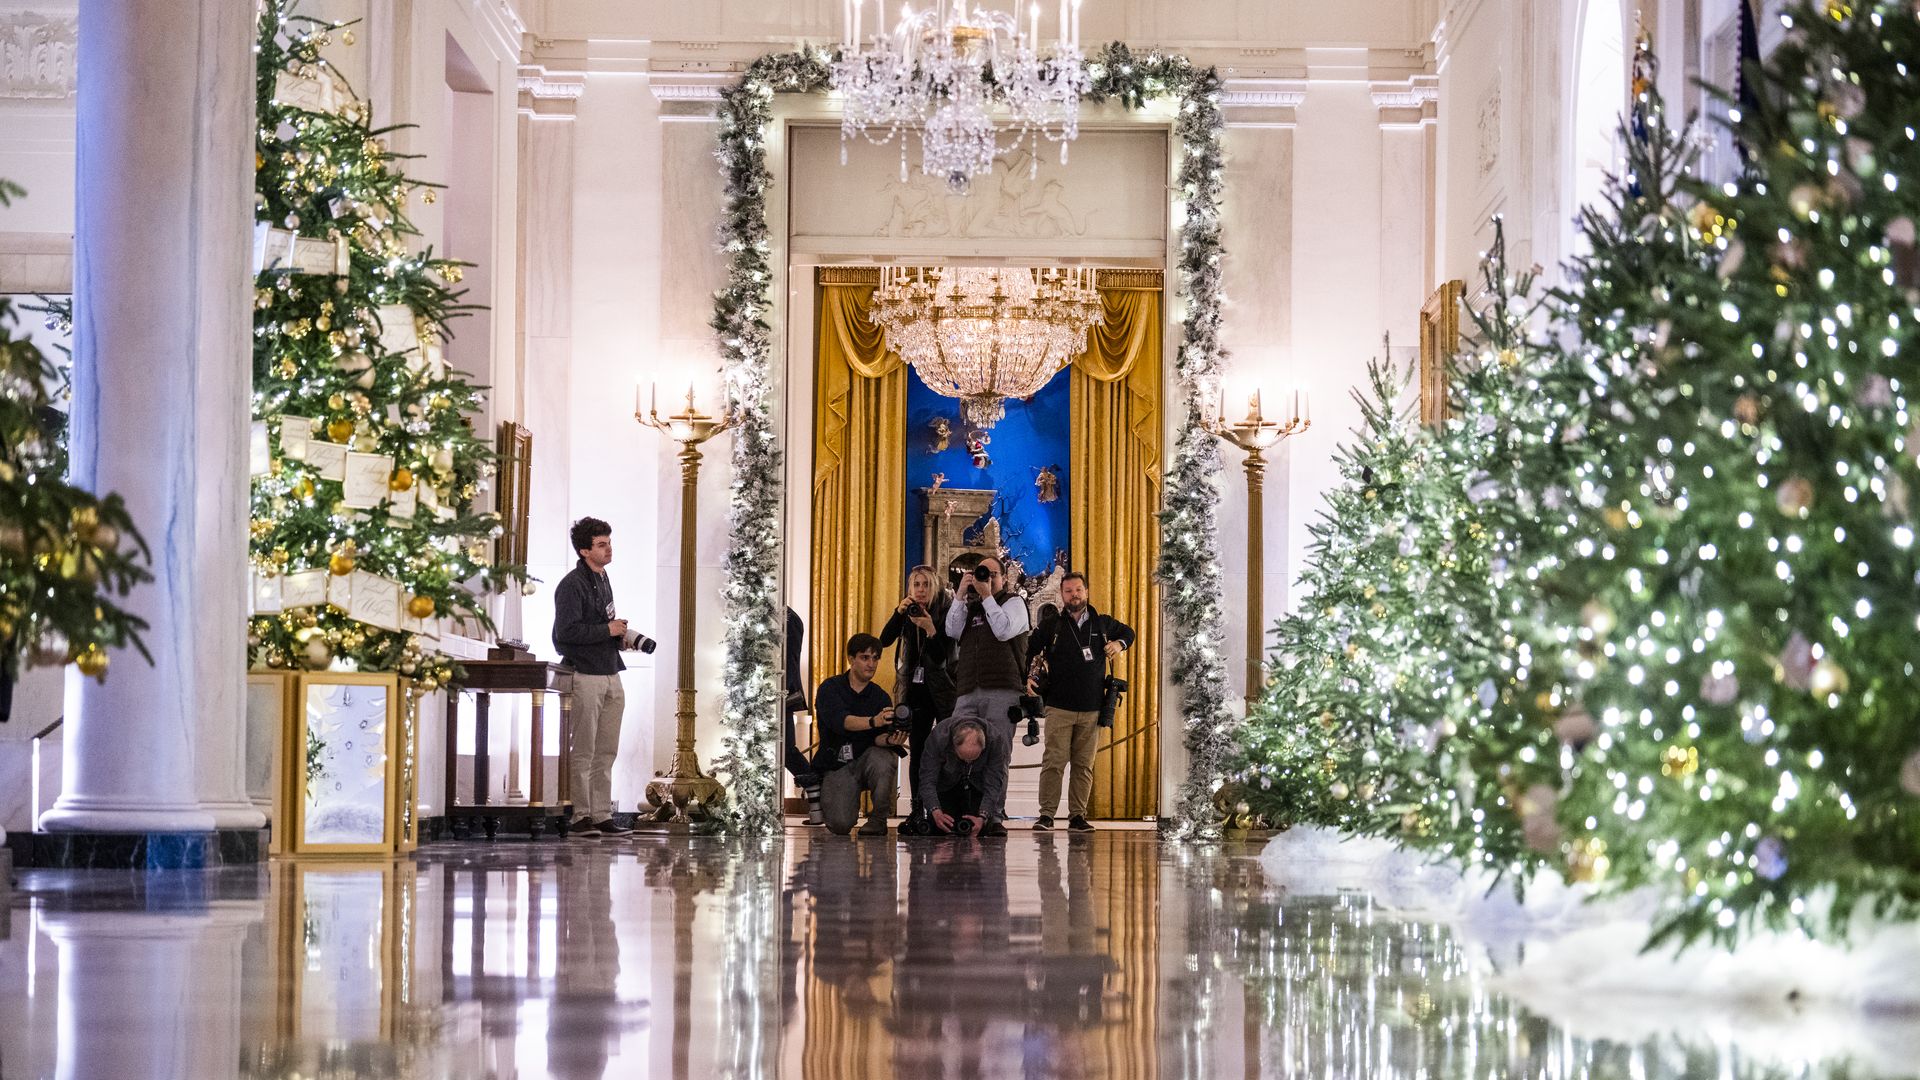 White House Christmas decor in the Cross Hall.